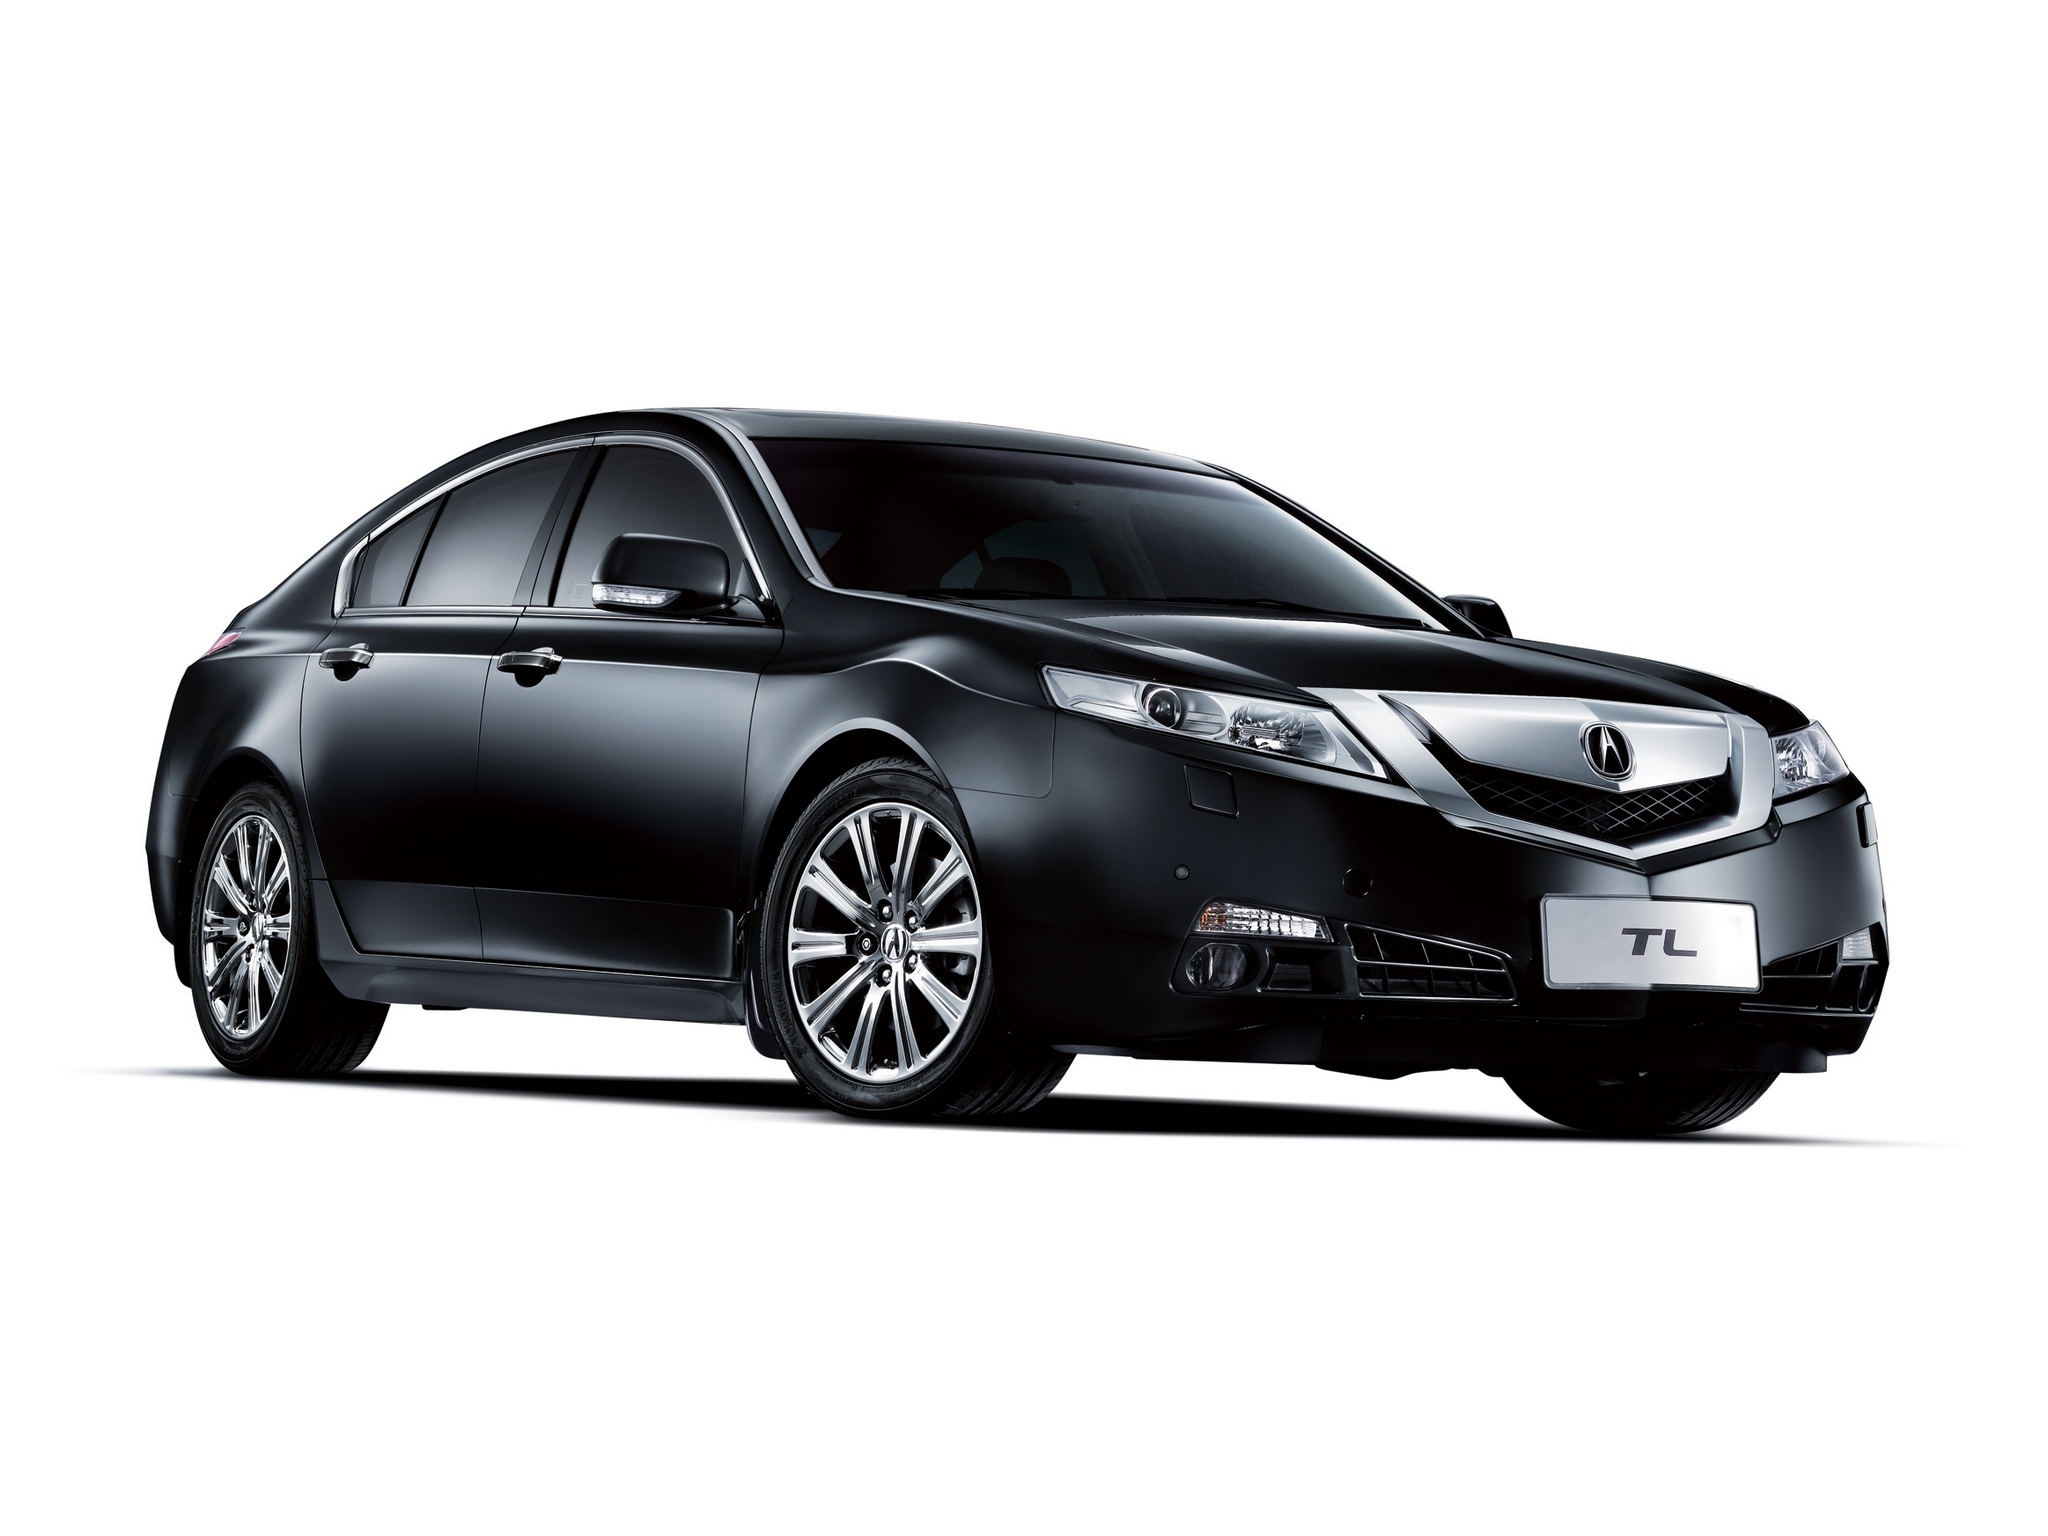 wallpapers auto, acura, cars, black, side view, style, akura, 2008, tl